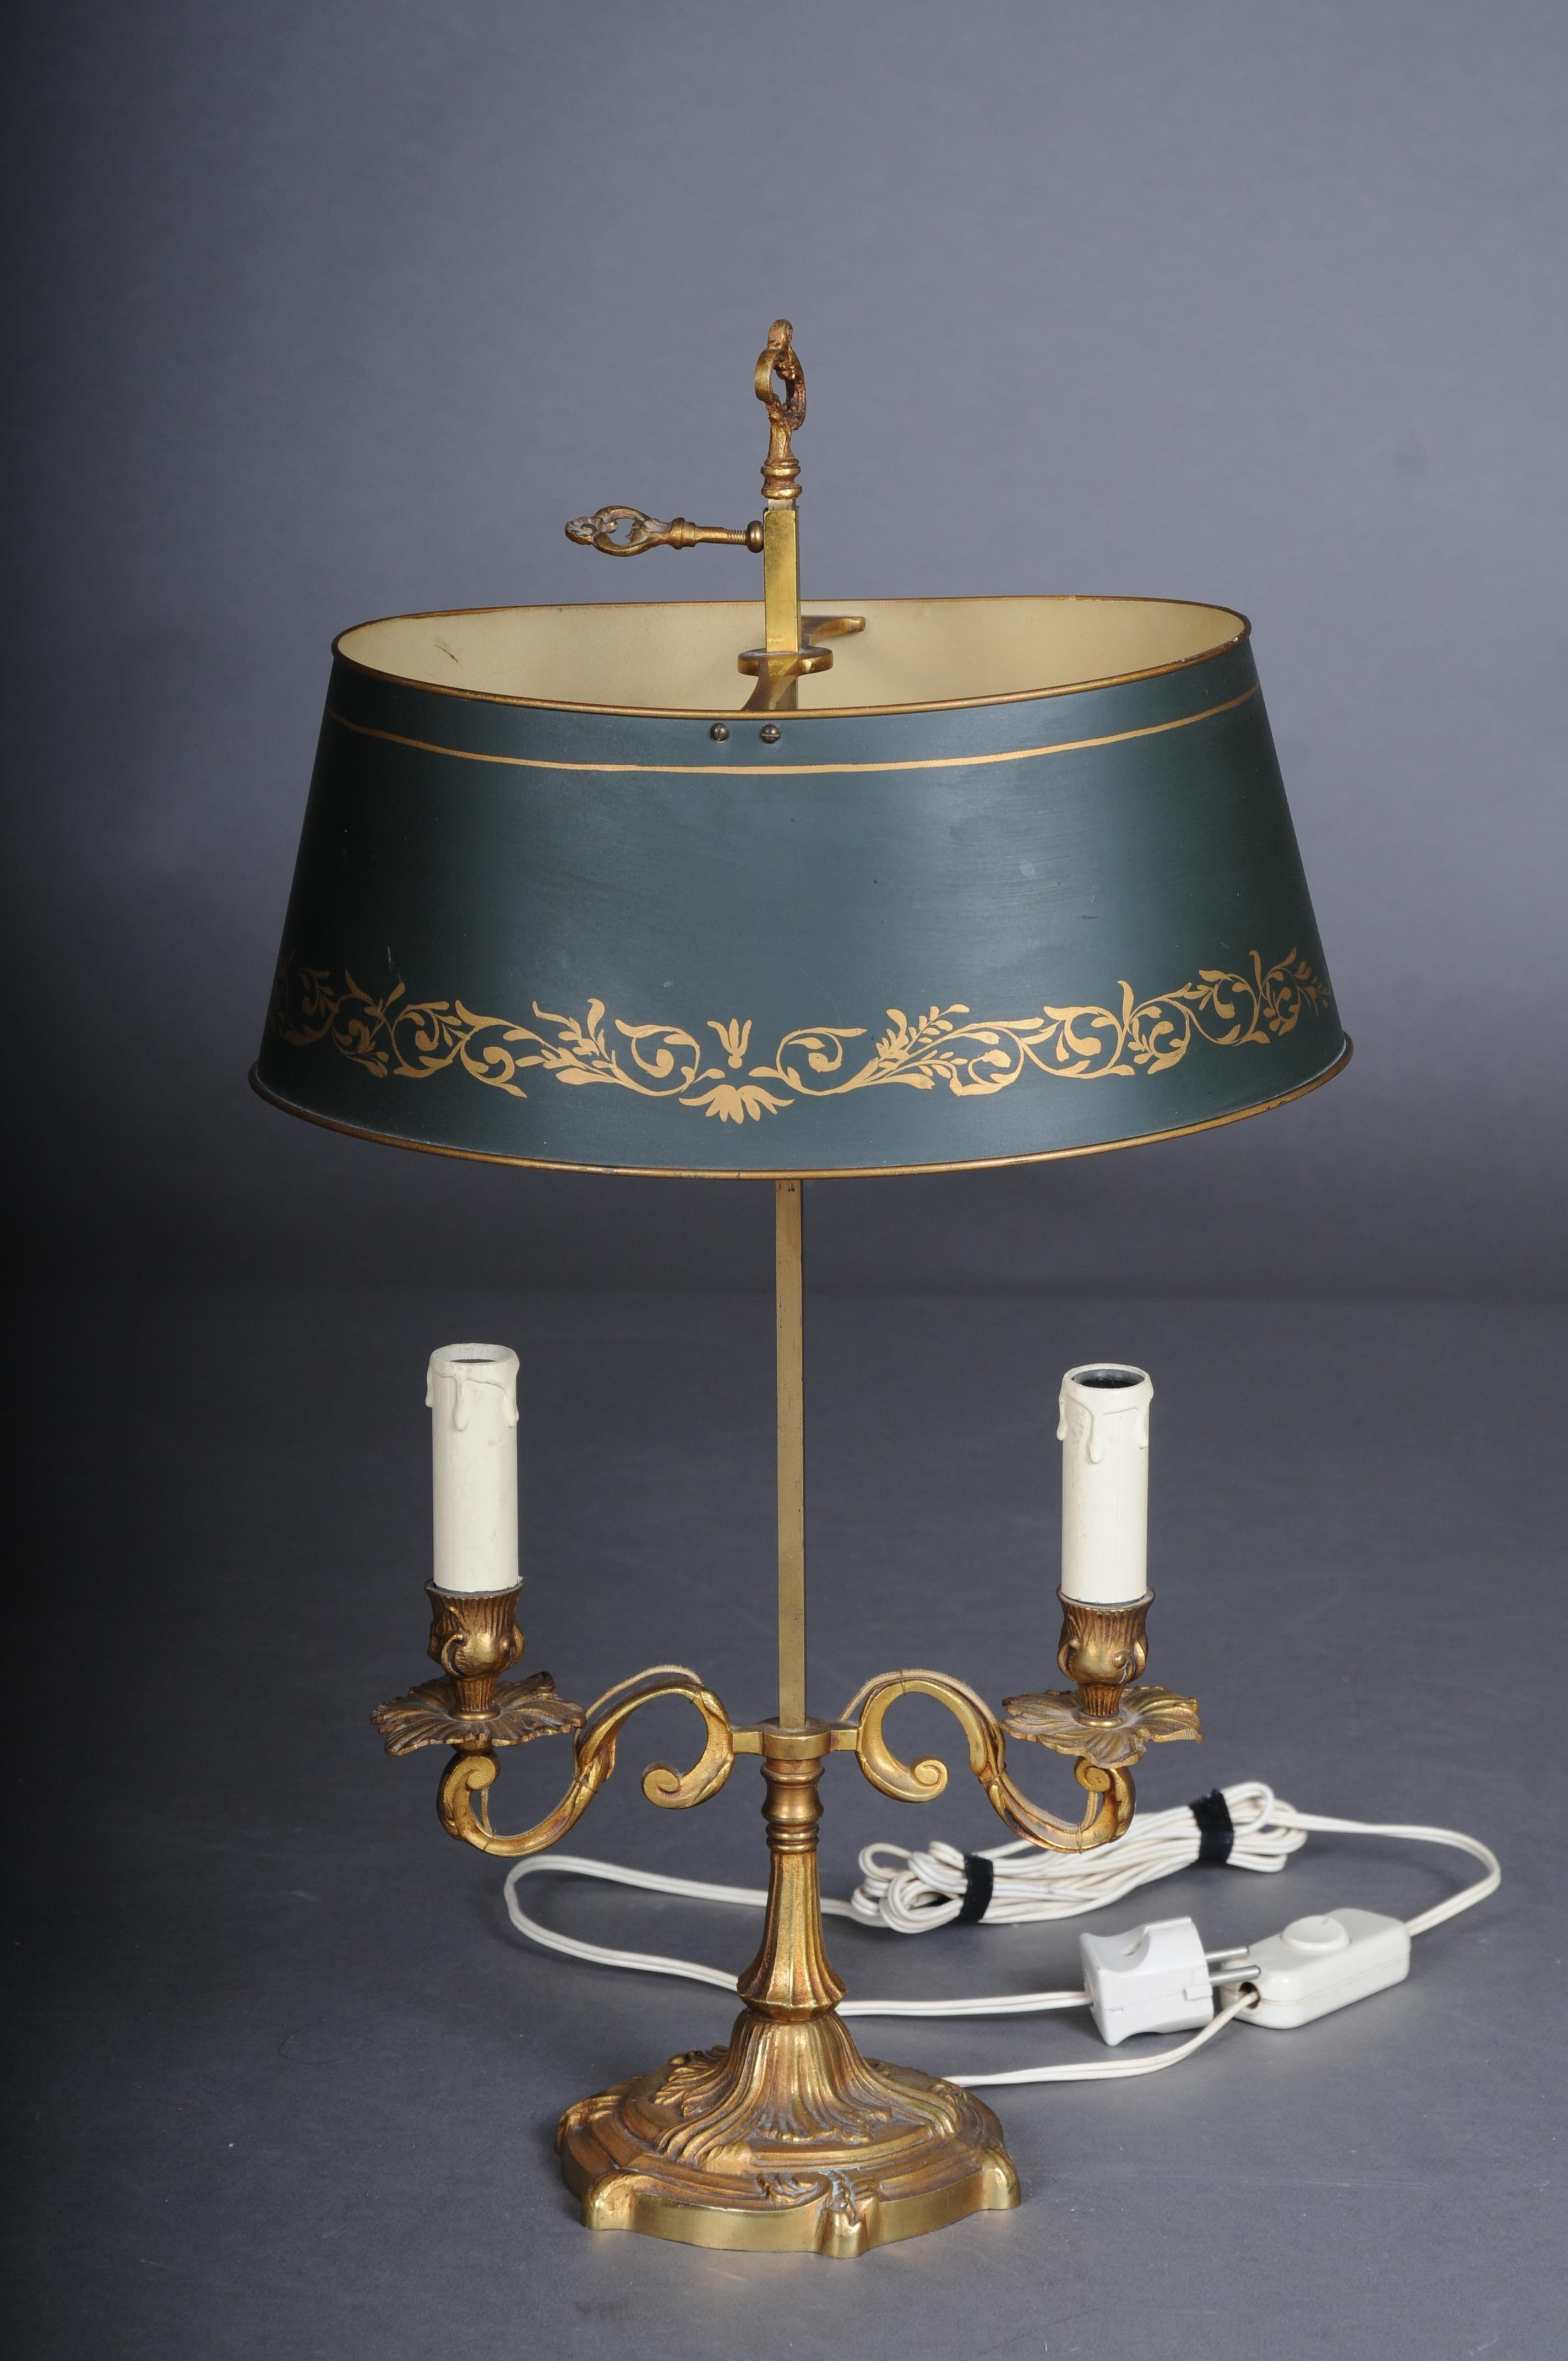 Antique desk lamp / table lamp Empire circa 1900, gold-plated bronze.

Solid bronze, fire-gilt, France circa 1900.
Table map with 2 sockets, electrified. finely chiselled bronze with a green shade, height adjustable. . quality workmanship. Very